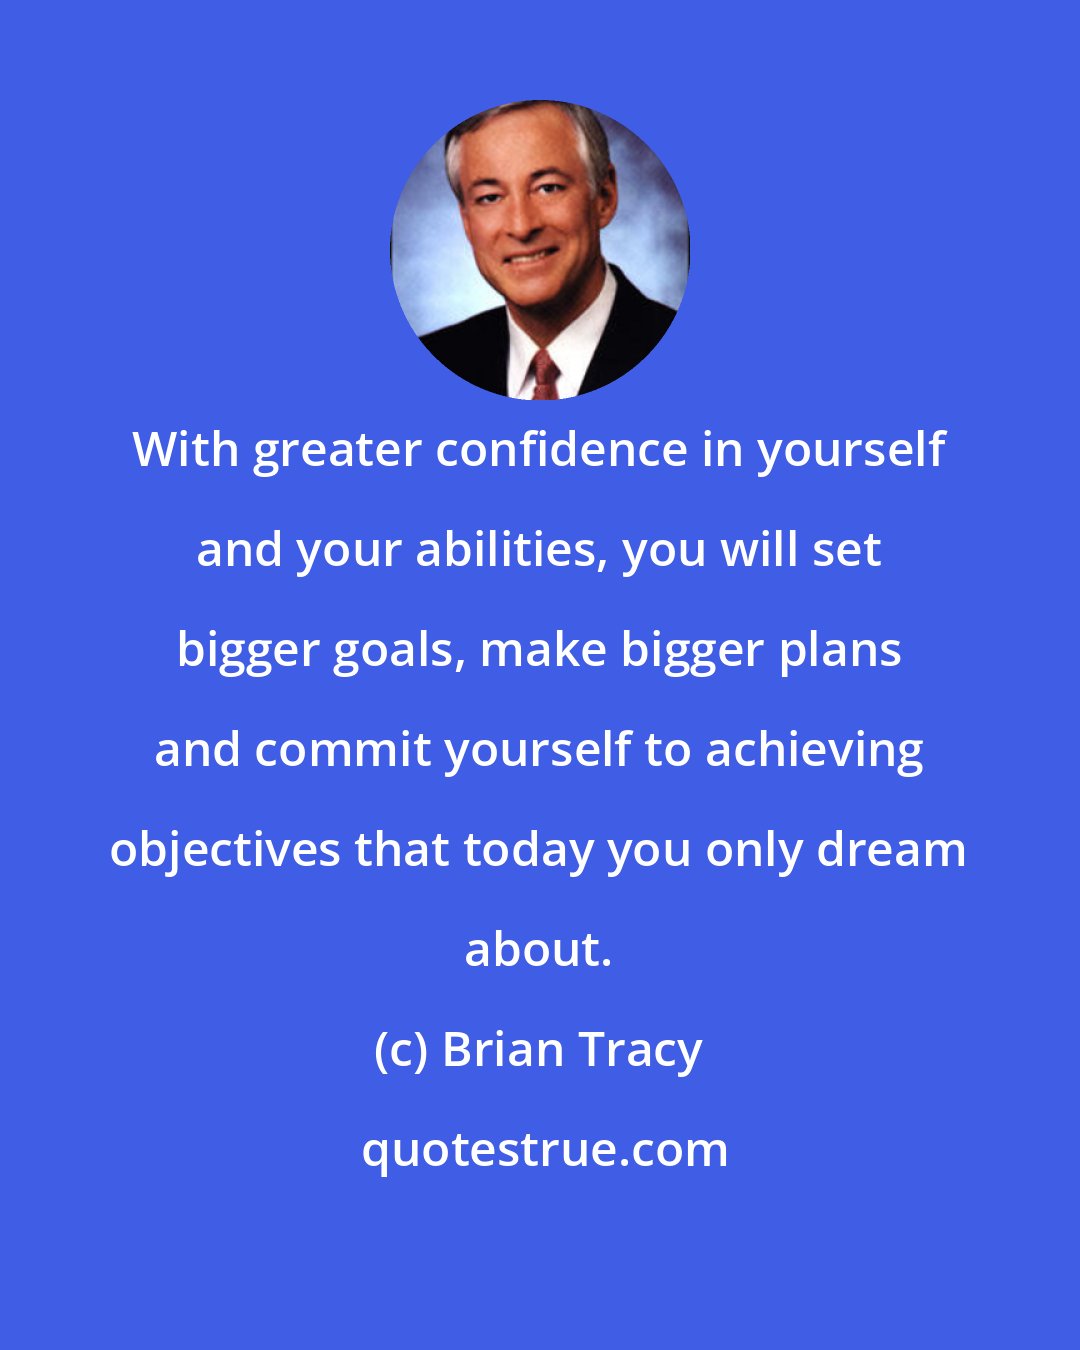 Brian Tracy: With greater confidence in yourself and your abilities, you will set bigger goals, make bigger plans and commit yourself to achieving objectives that today you only dream about.